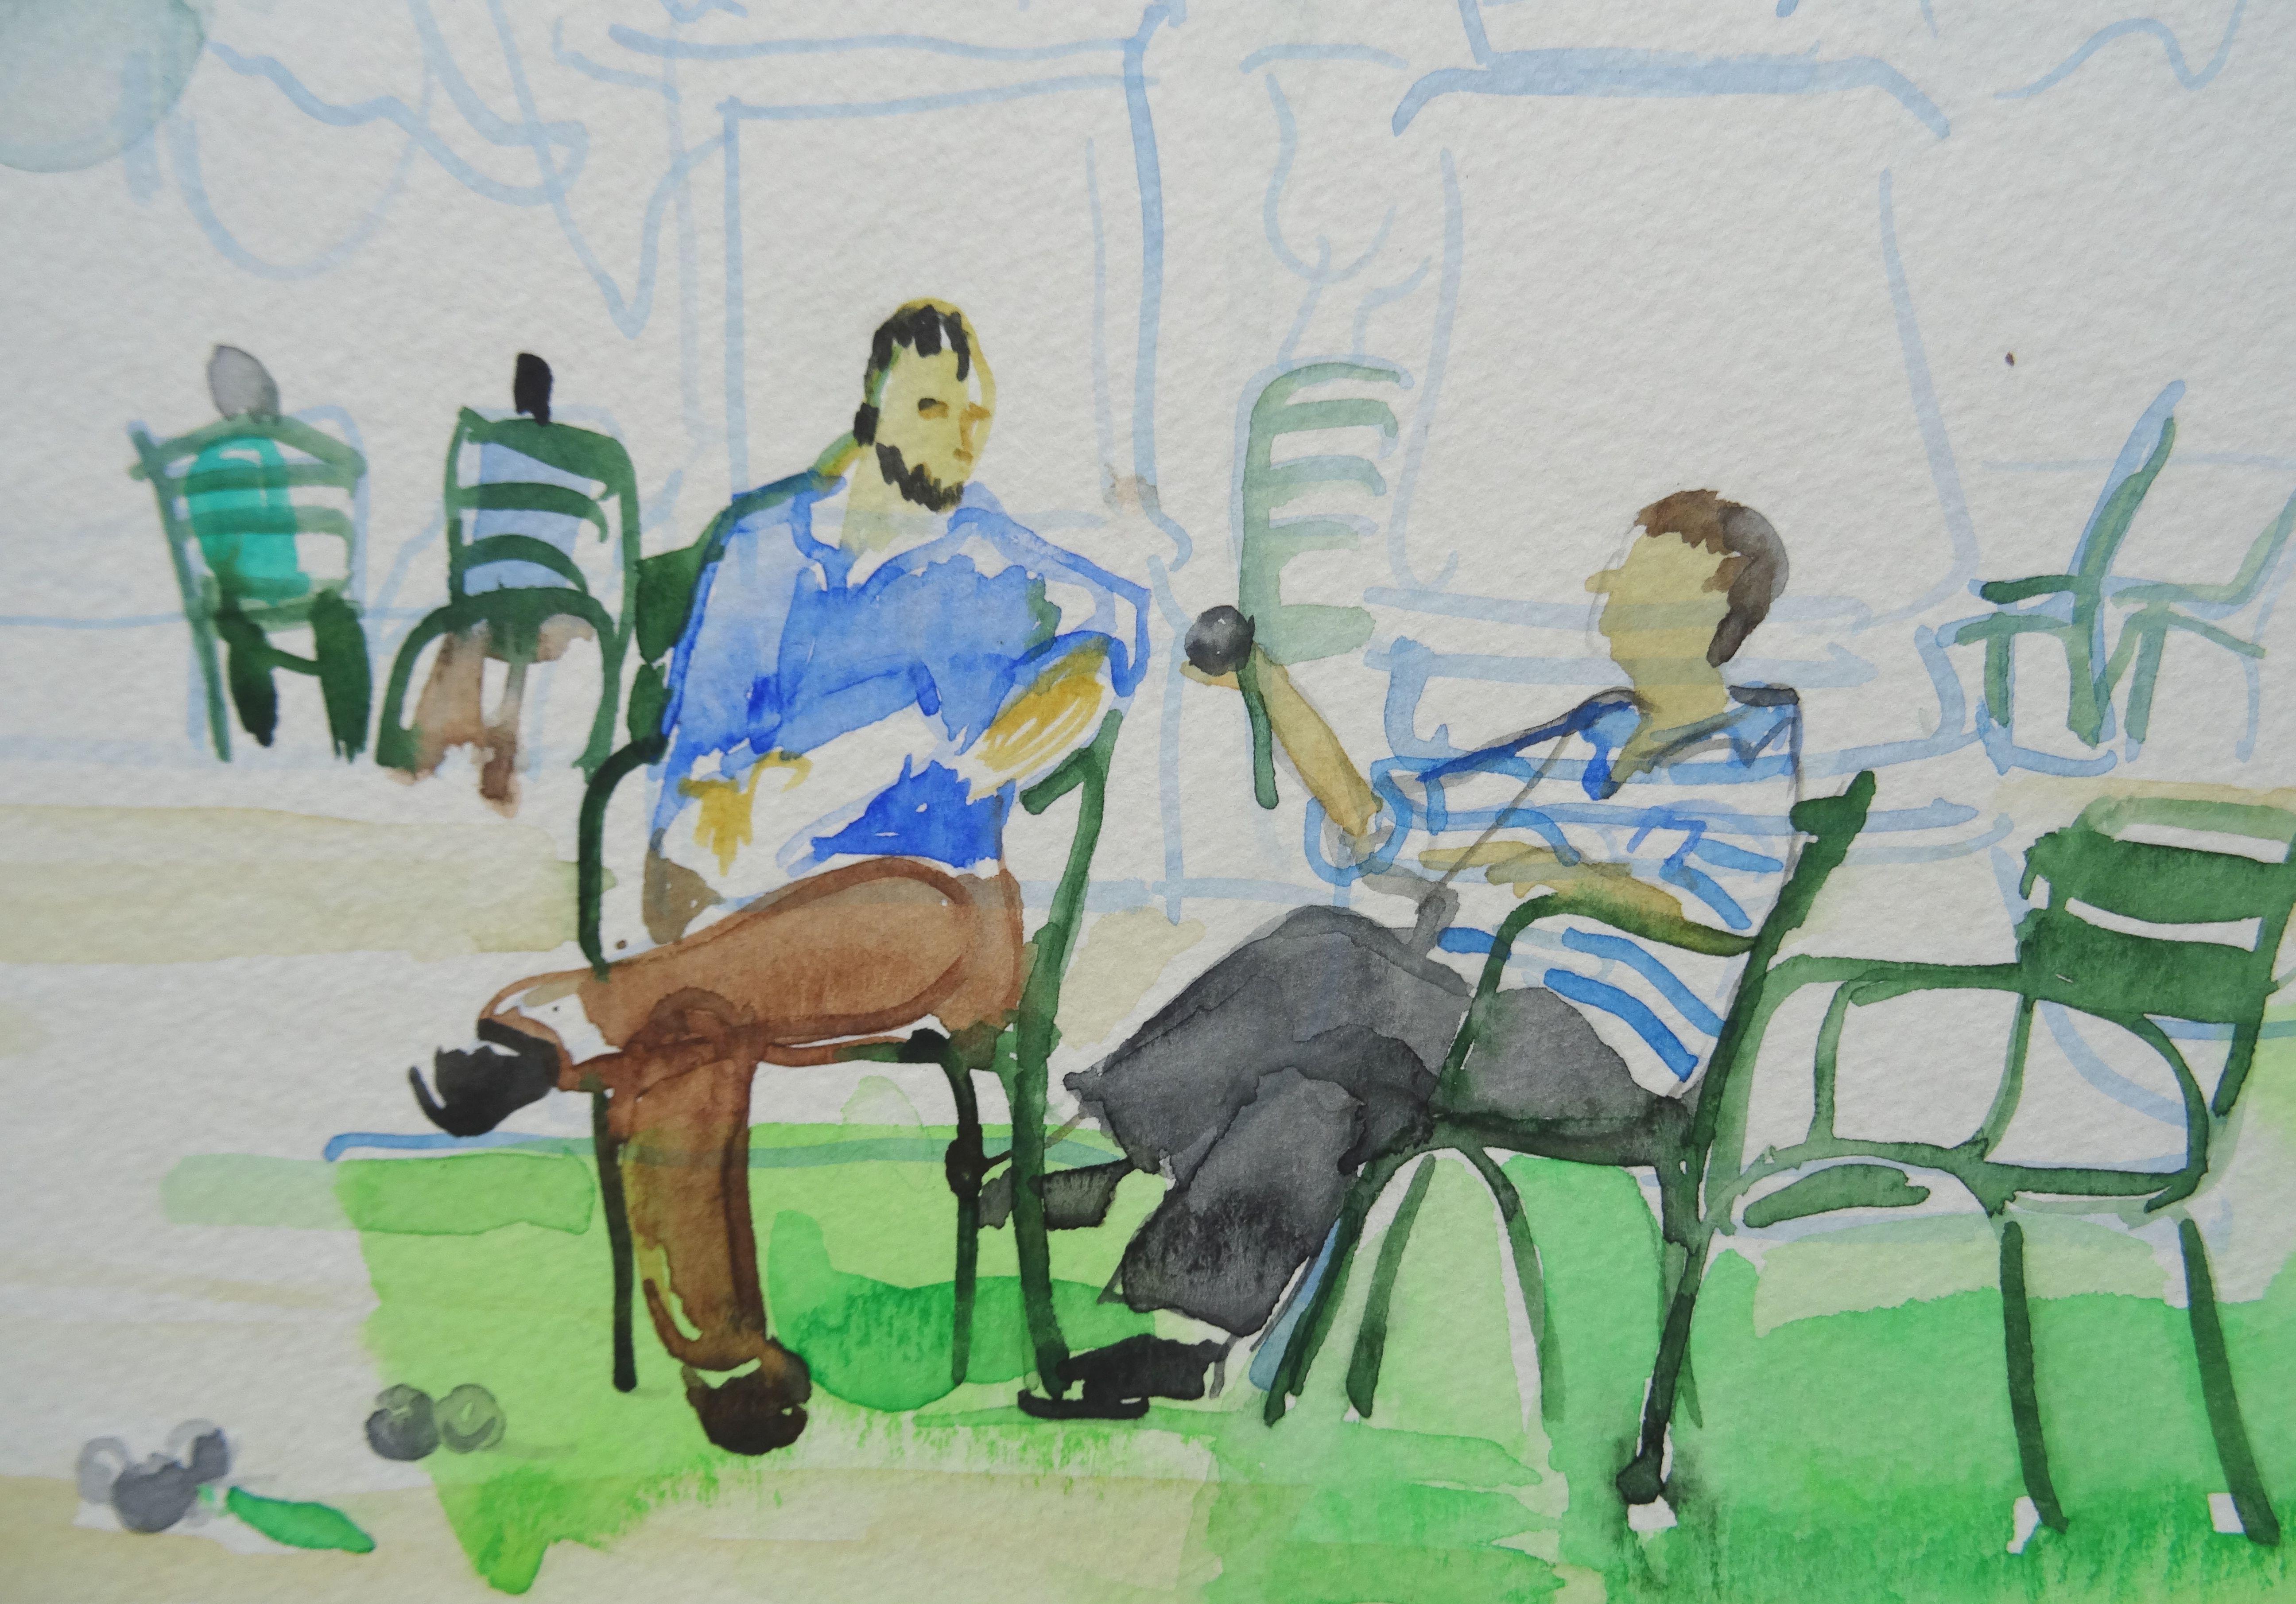 Tuileries garden. 2010. Watercolor on paper, 38x50 cm - Impressionist Art by Ingrida Irbe